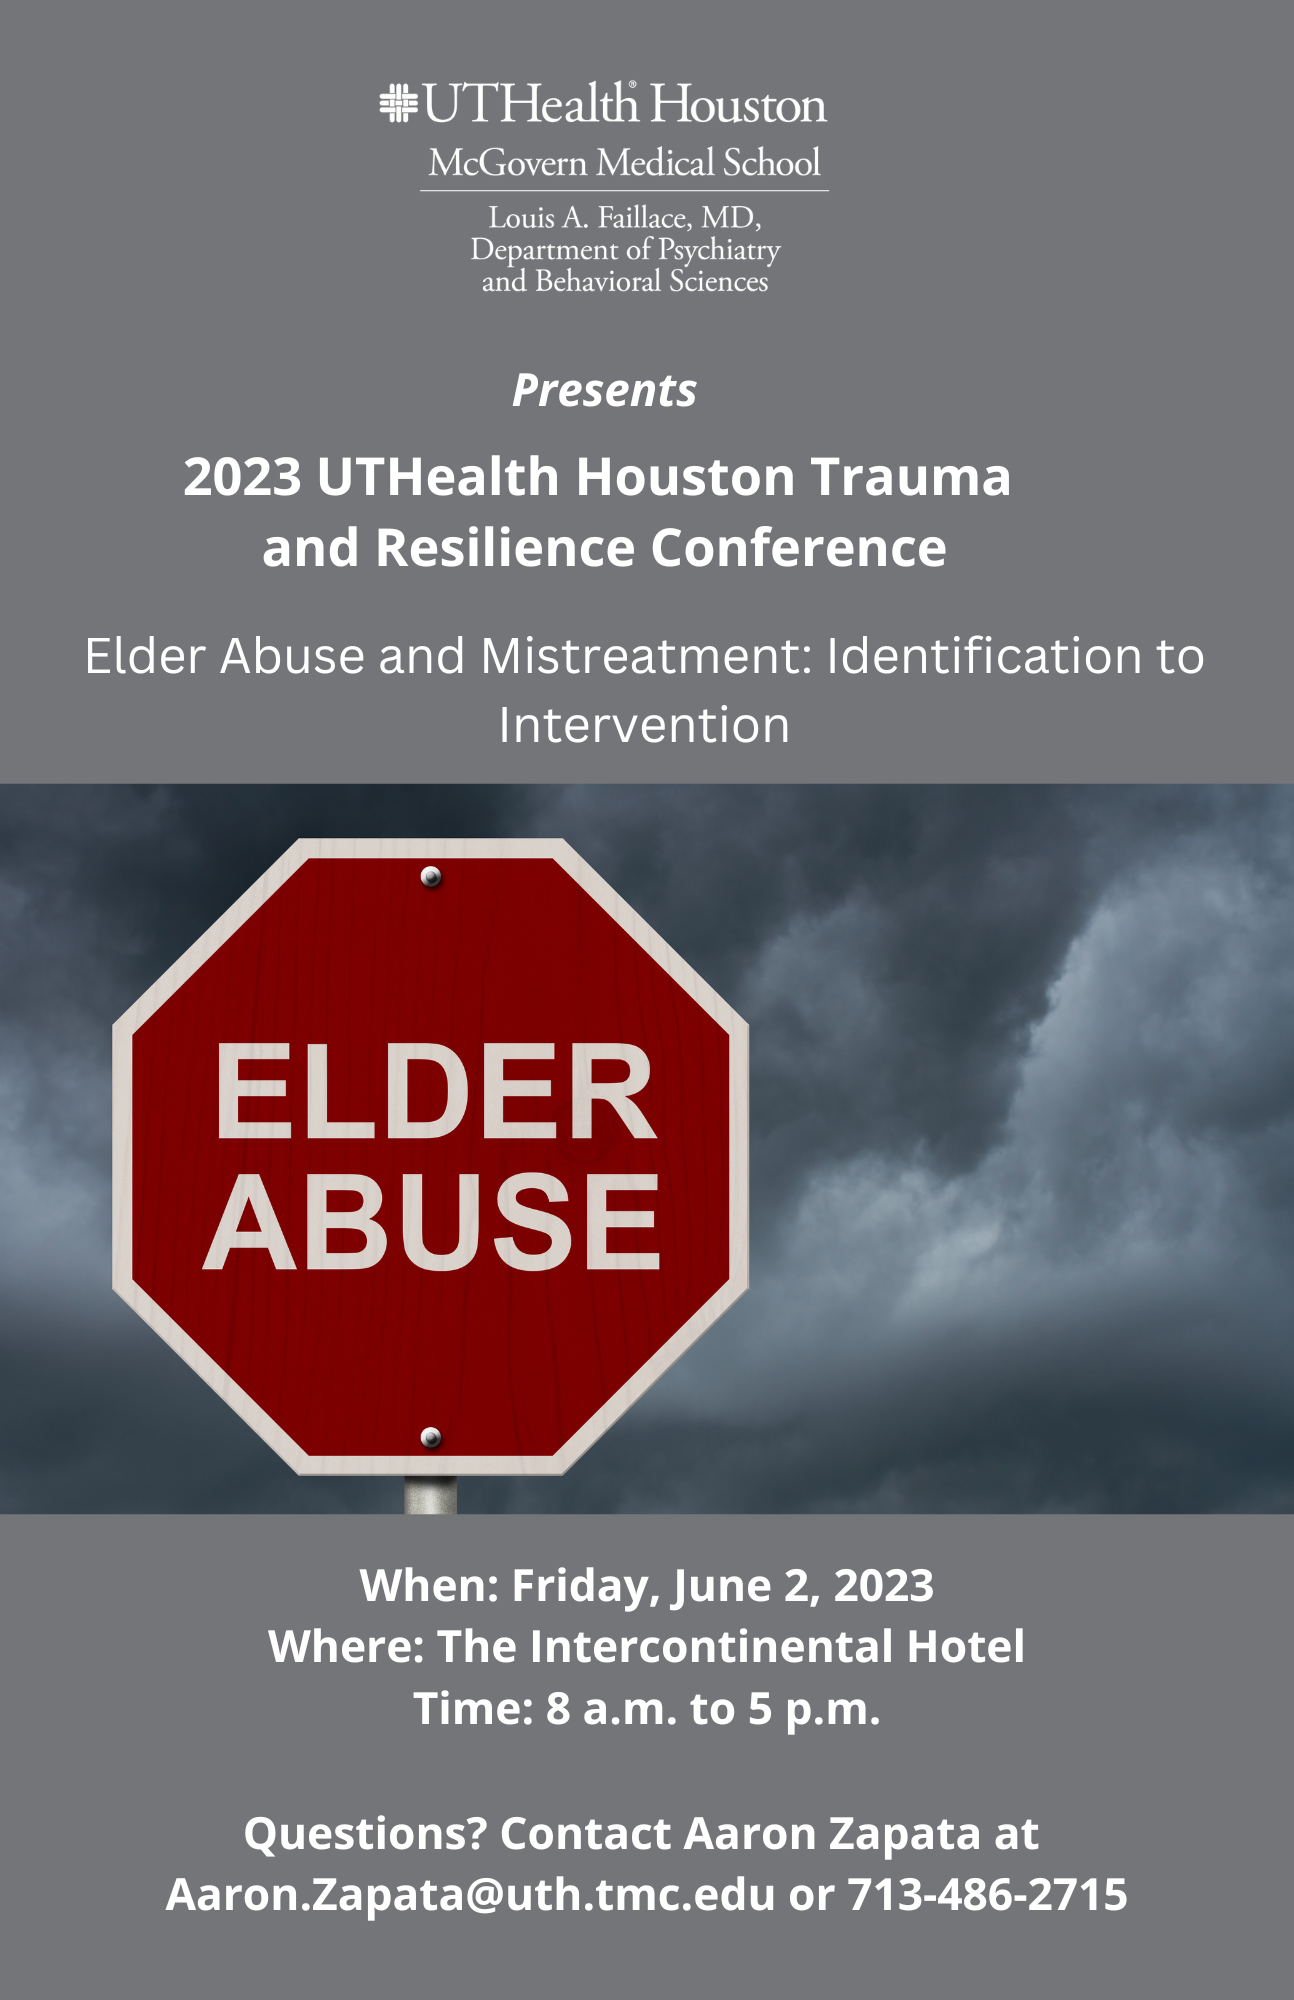 Trauma & Resilience Conference